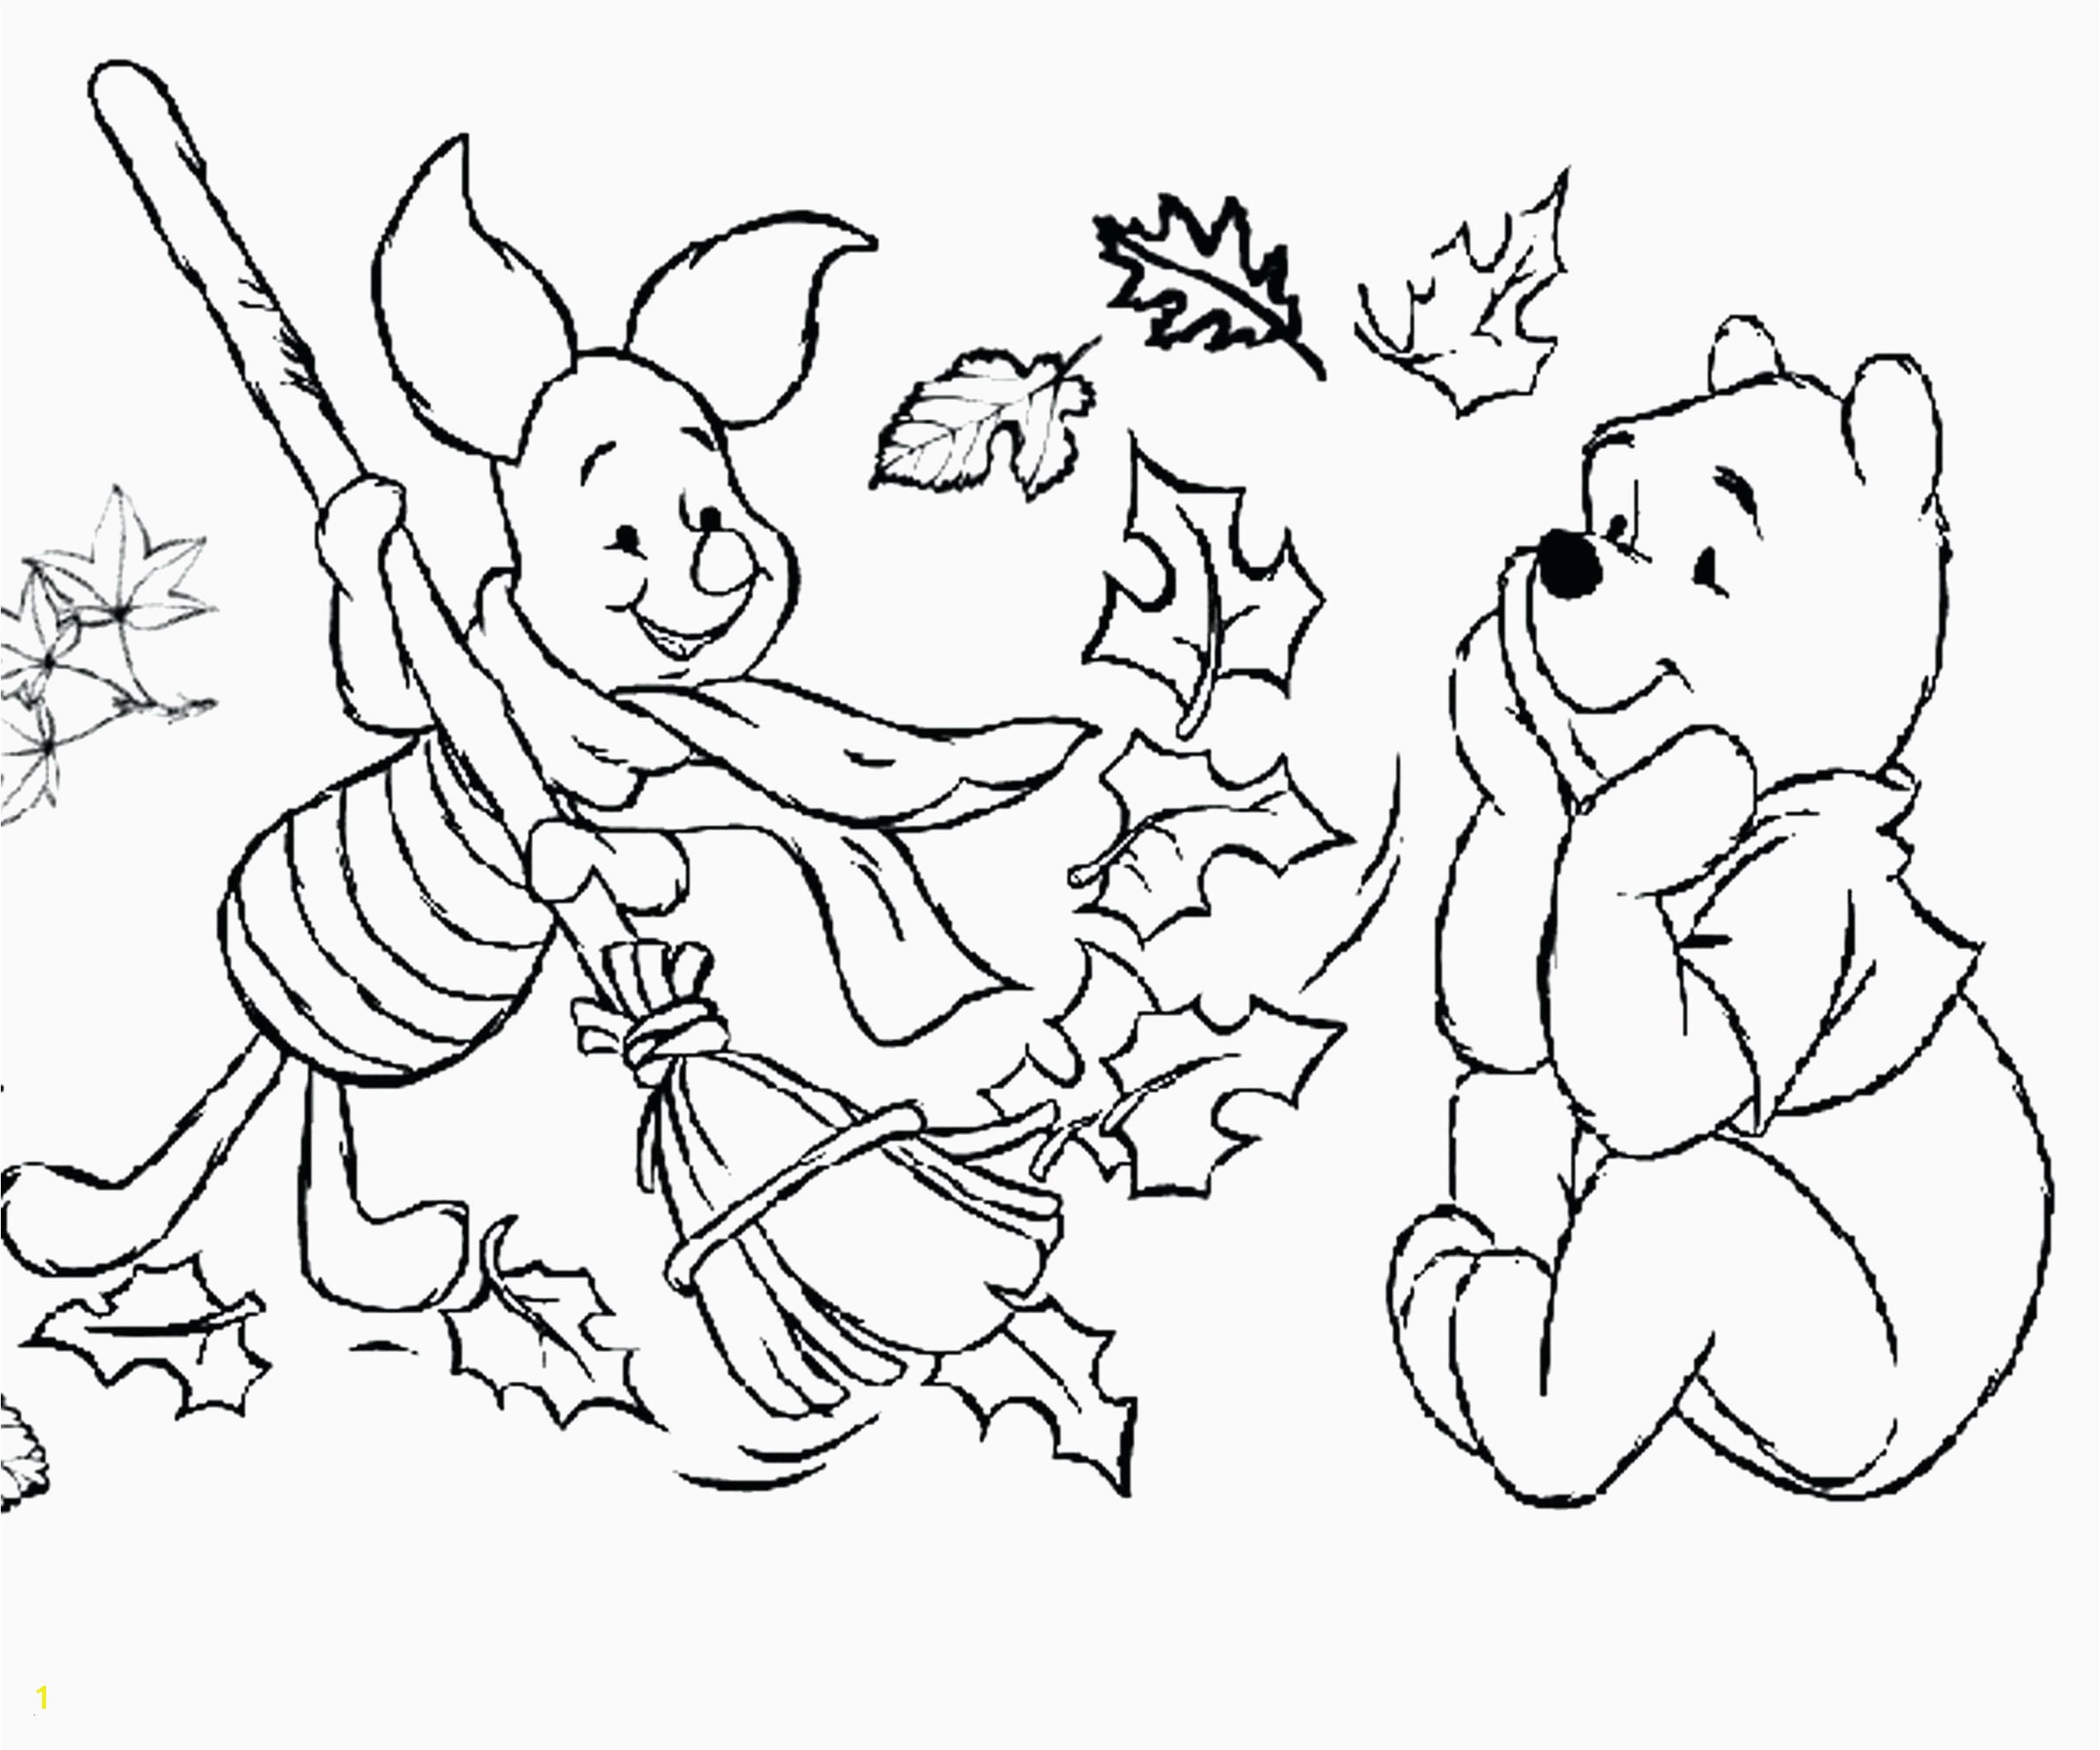 Frog and Lily Pad Coloring Pages Frog Coloring Pages for Preschoolers Coloring Pages Coloring Pages